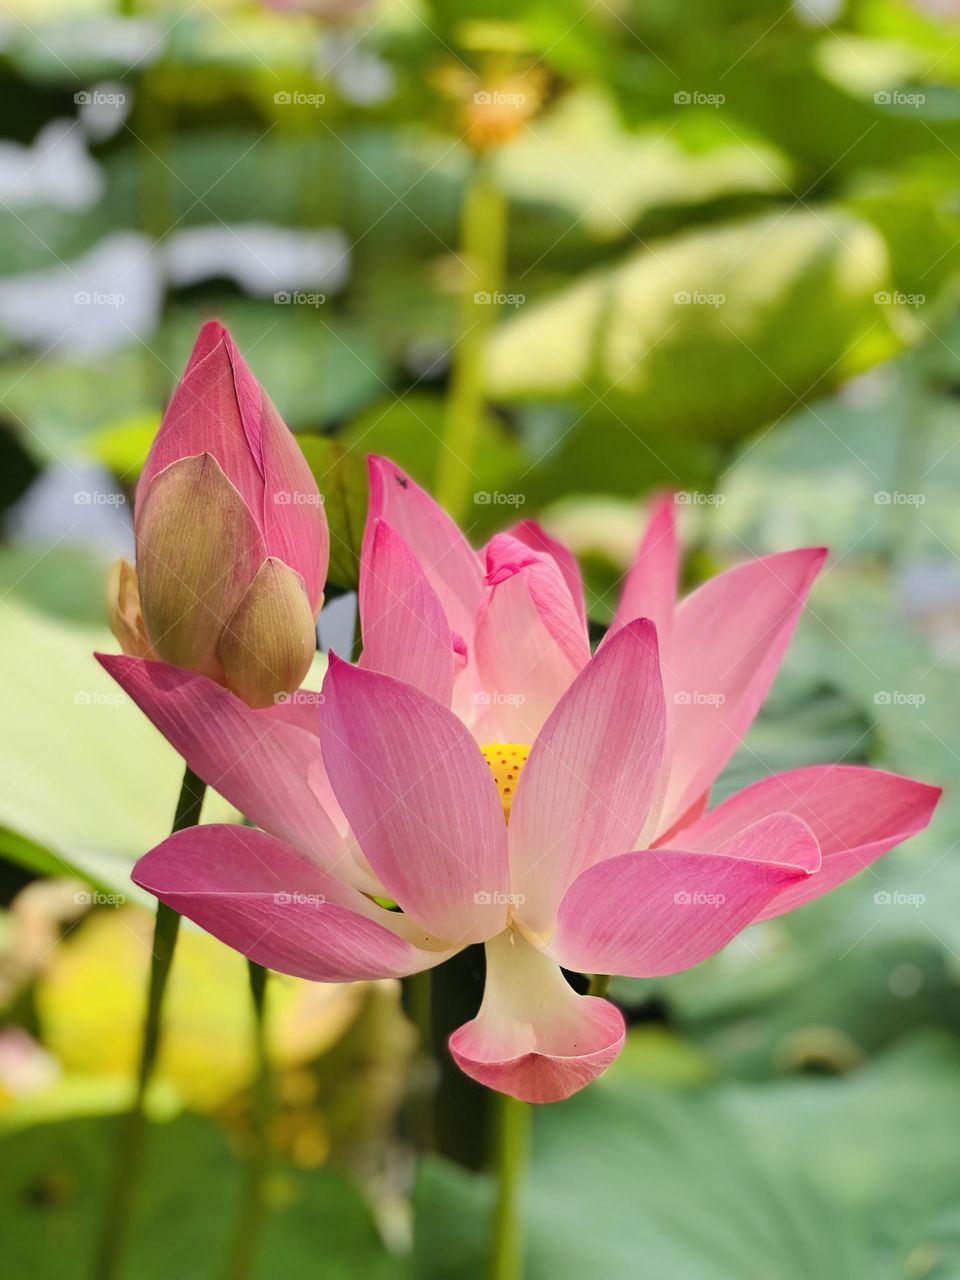 Nelumbo nucifera or in Indonesia is better known as the lotus flower. This flower generally grows in containers with water and is often found in the Bogor botanical gardens